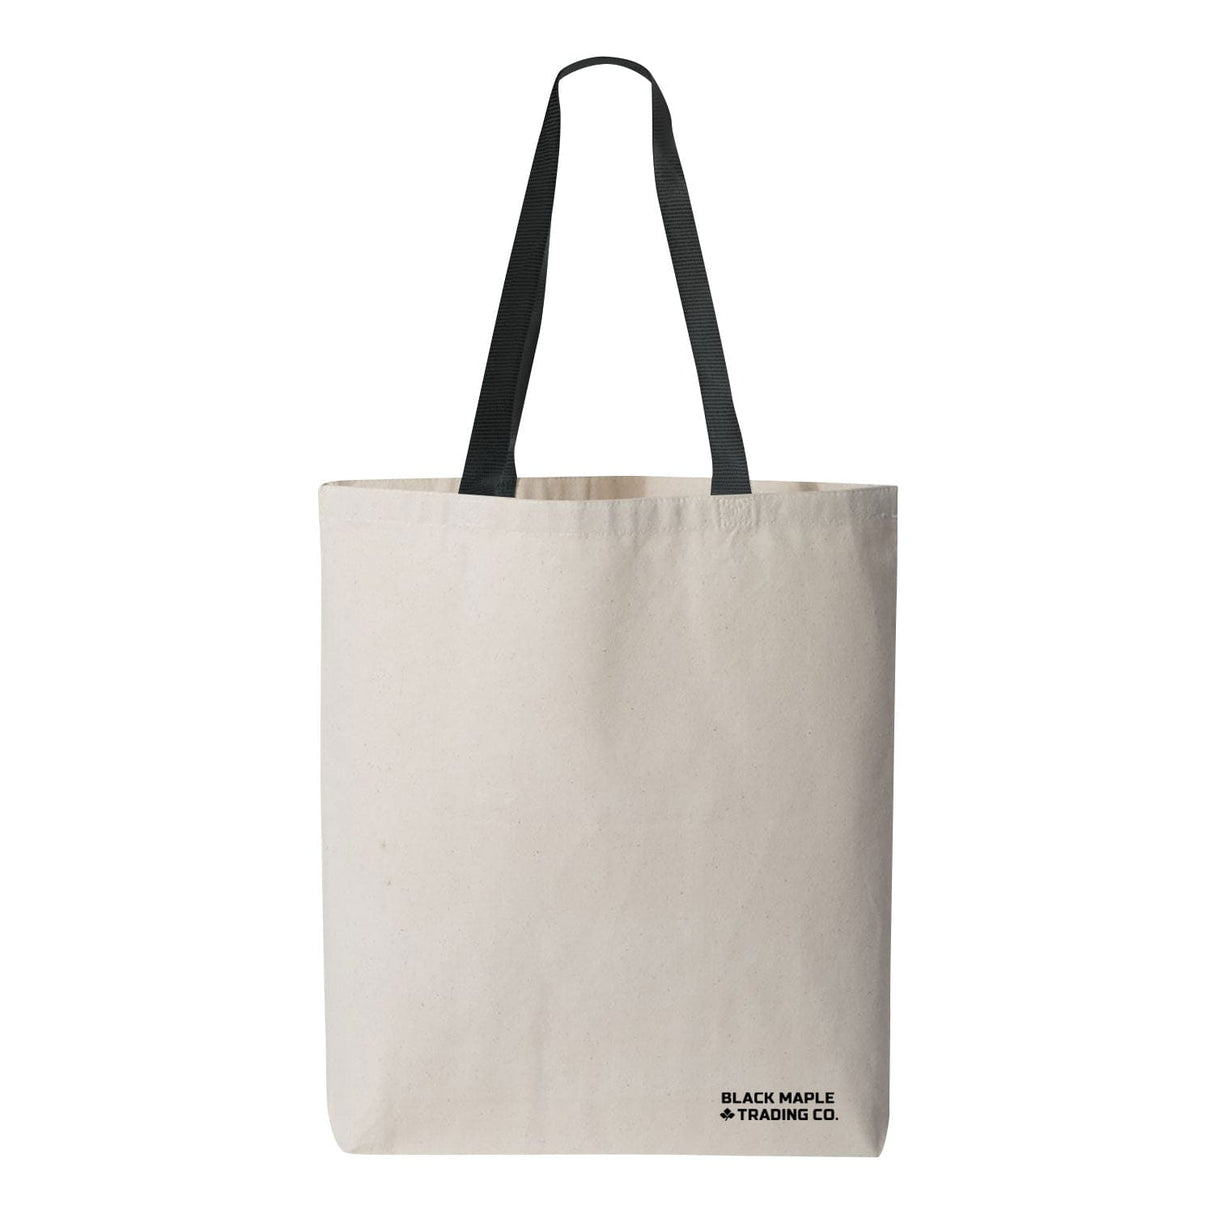 Canadian Butterfly Alliance Canvas Tote Bag